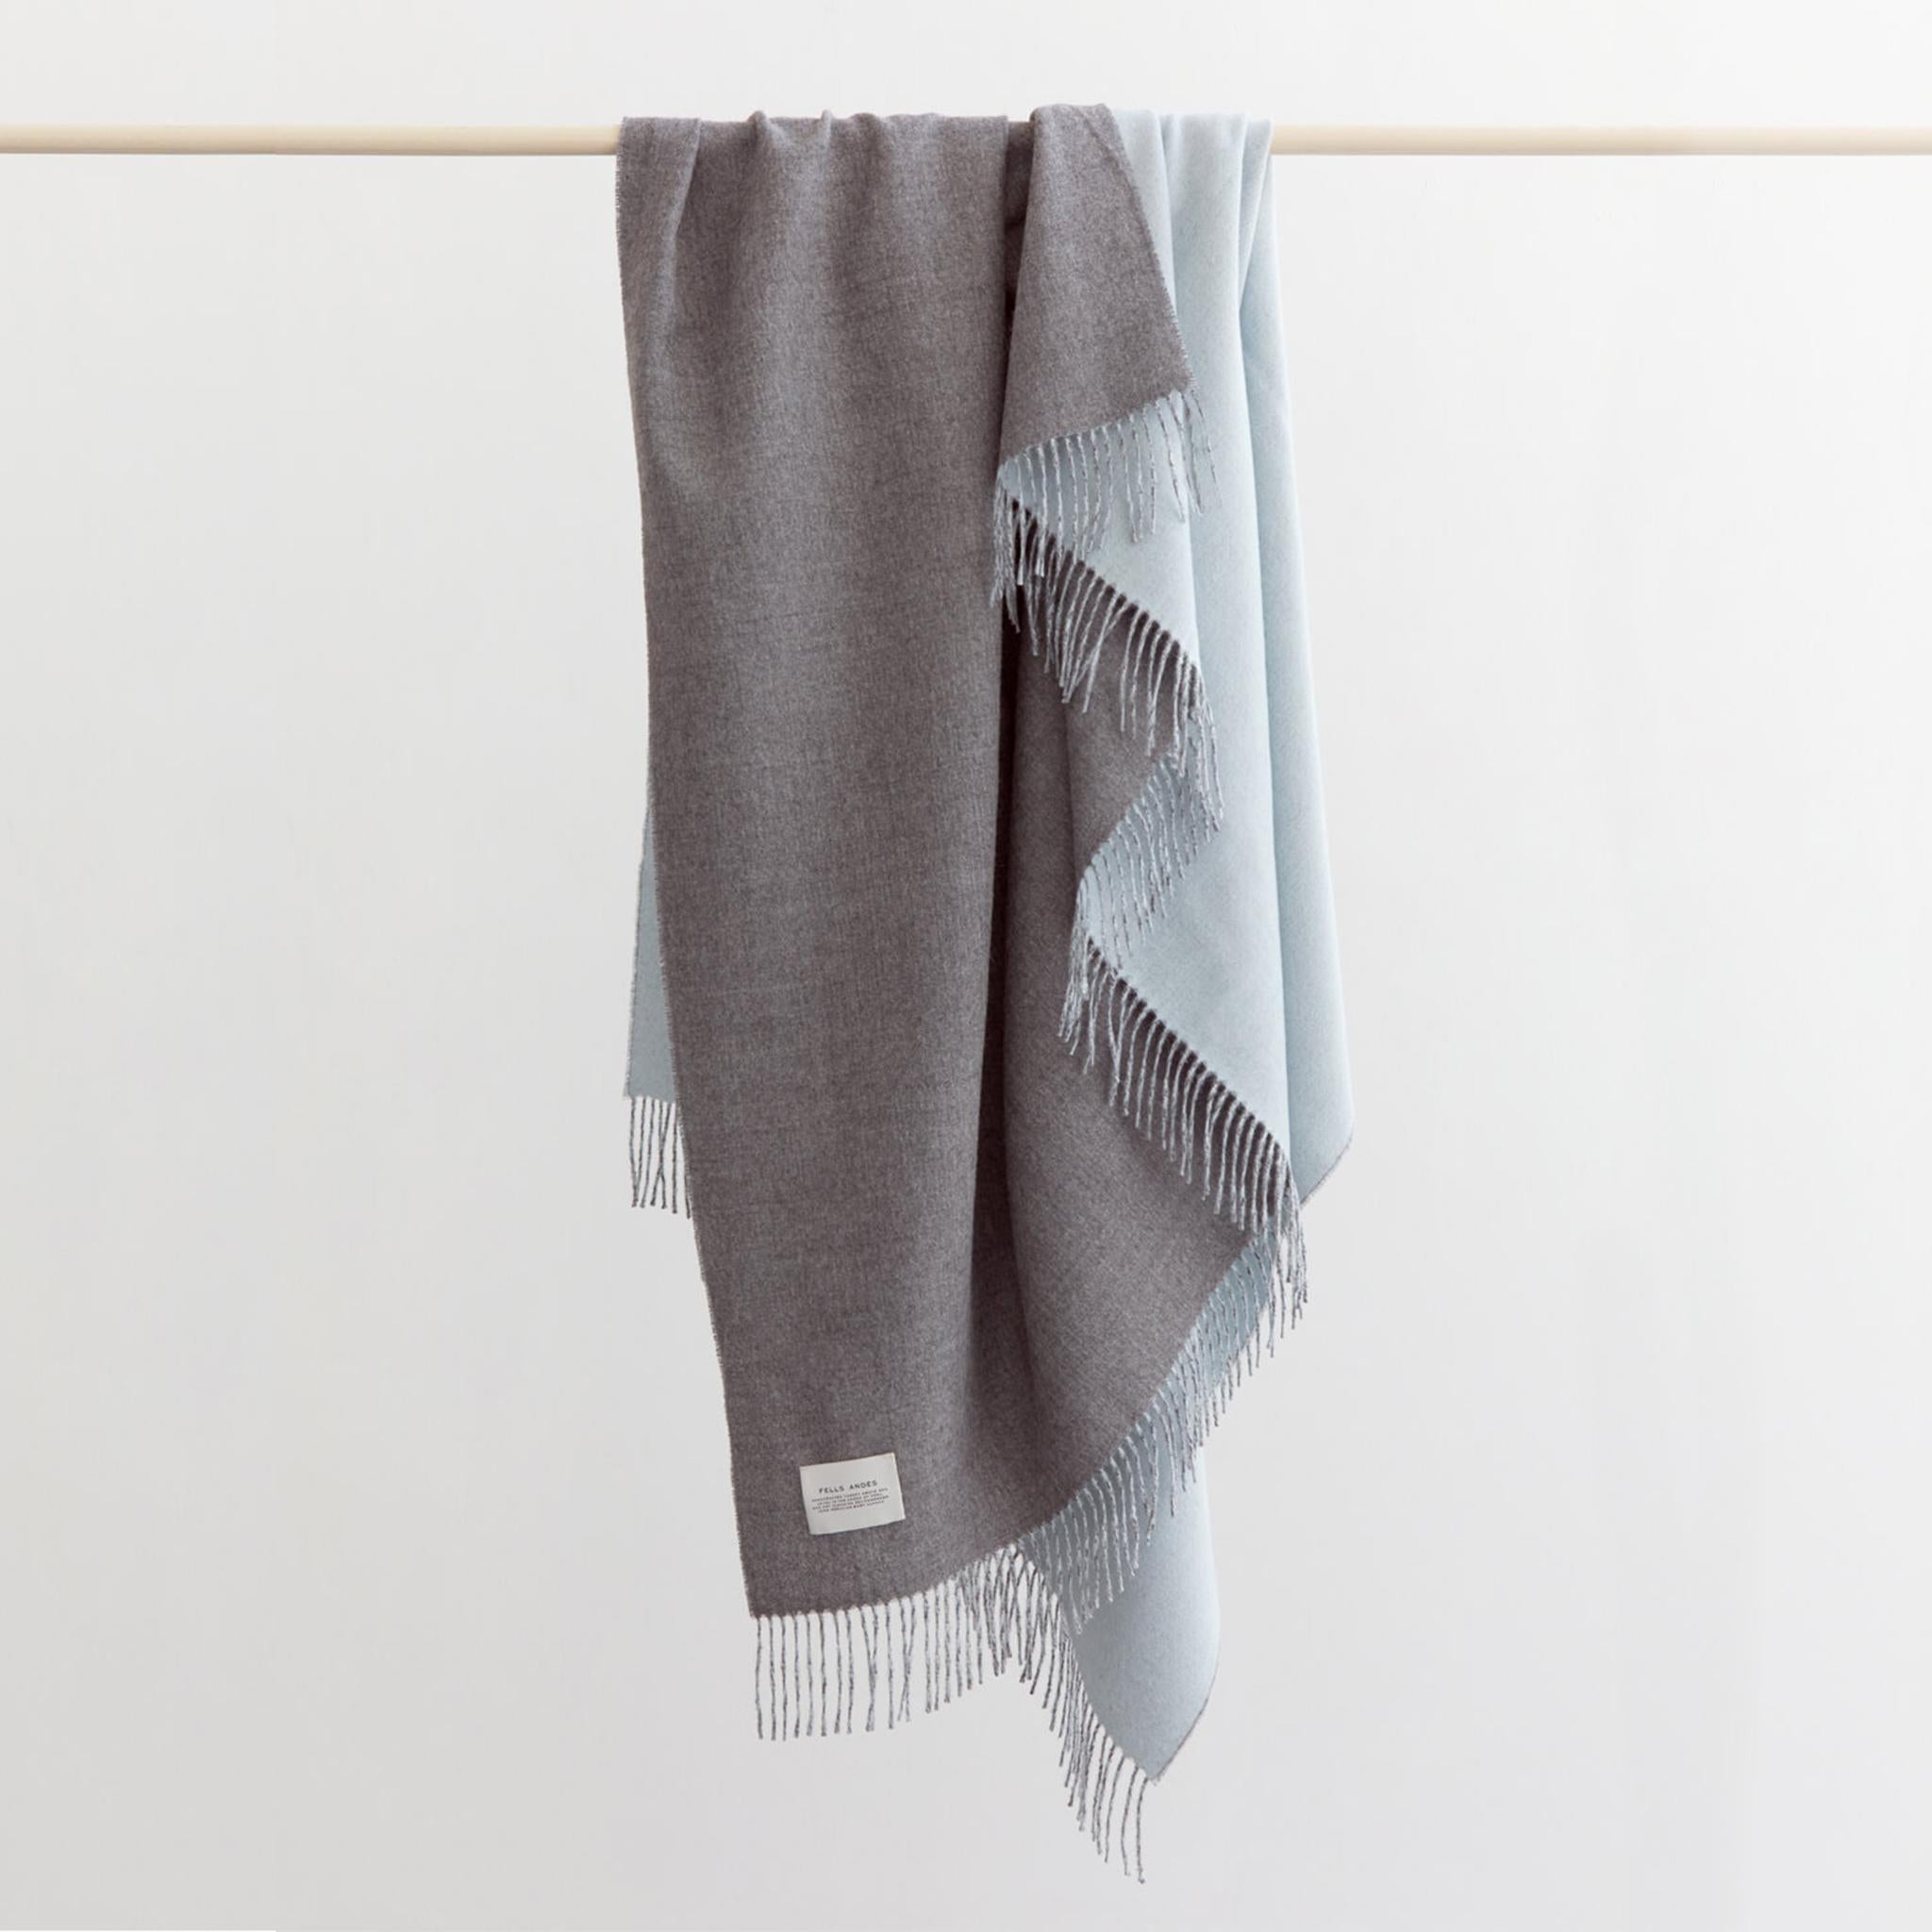 About

A fresh dual sided woven throw with blended tassel detail. The Kontrast throw by Fells Andes is designed in San Francisco and handmade in the Andes, supporting local culture and craft.

Made from 100% Royal Baby Alpaca - one of the